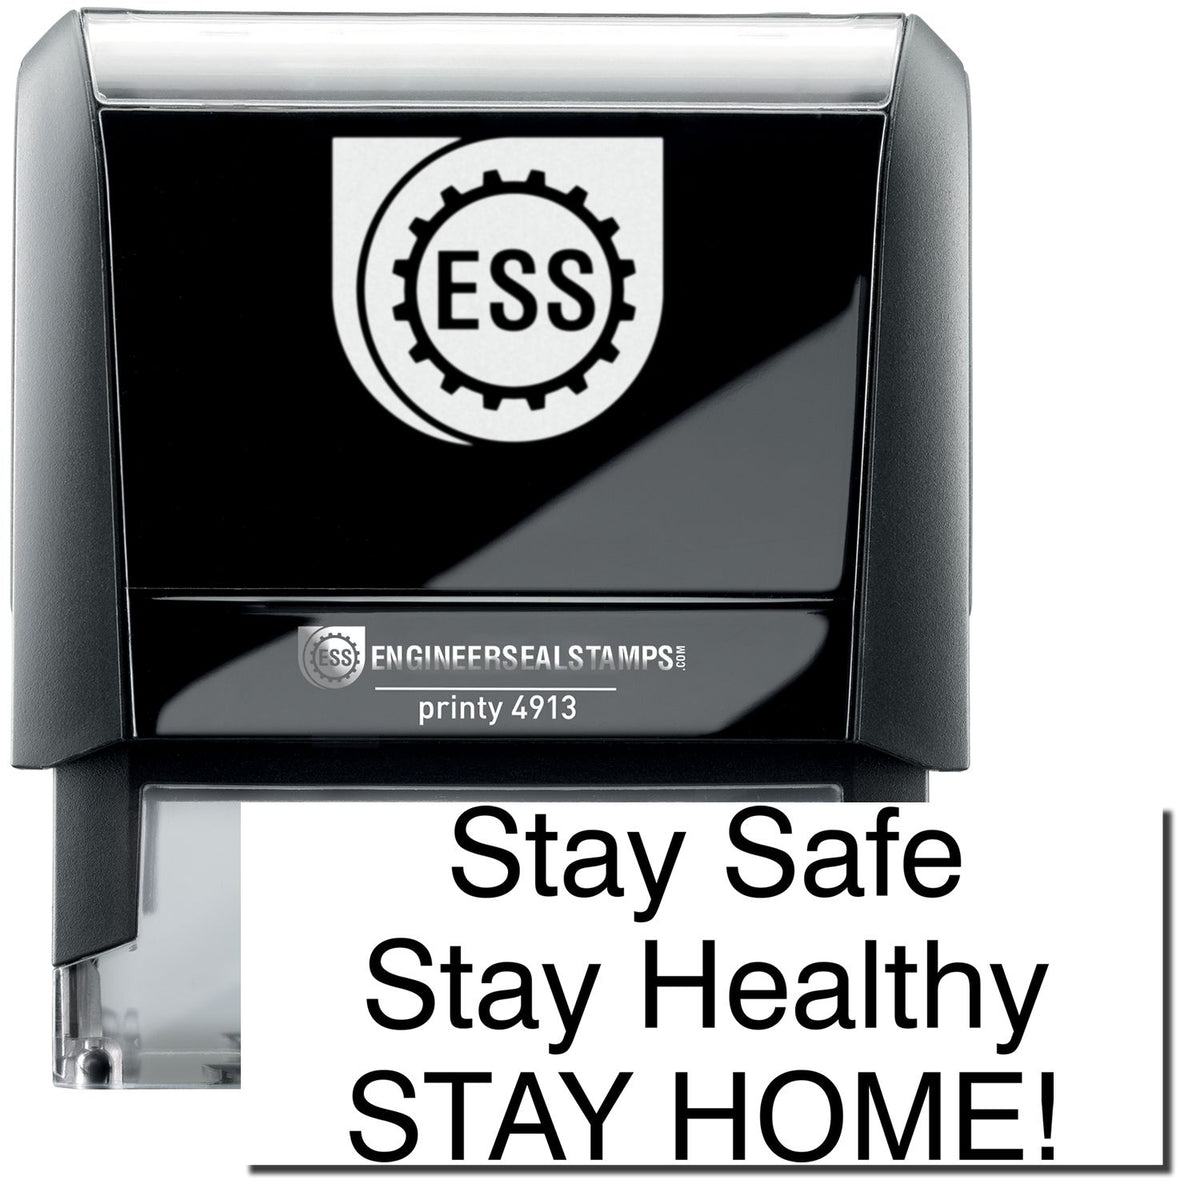 A self-inking stamp with a stamped image showing how the text &quot;Stay Safe Stay Healthy STAY HOME!&quot; in a large font is displayed by it after stamping.